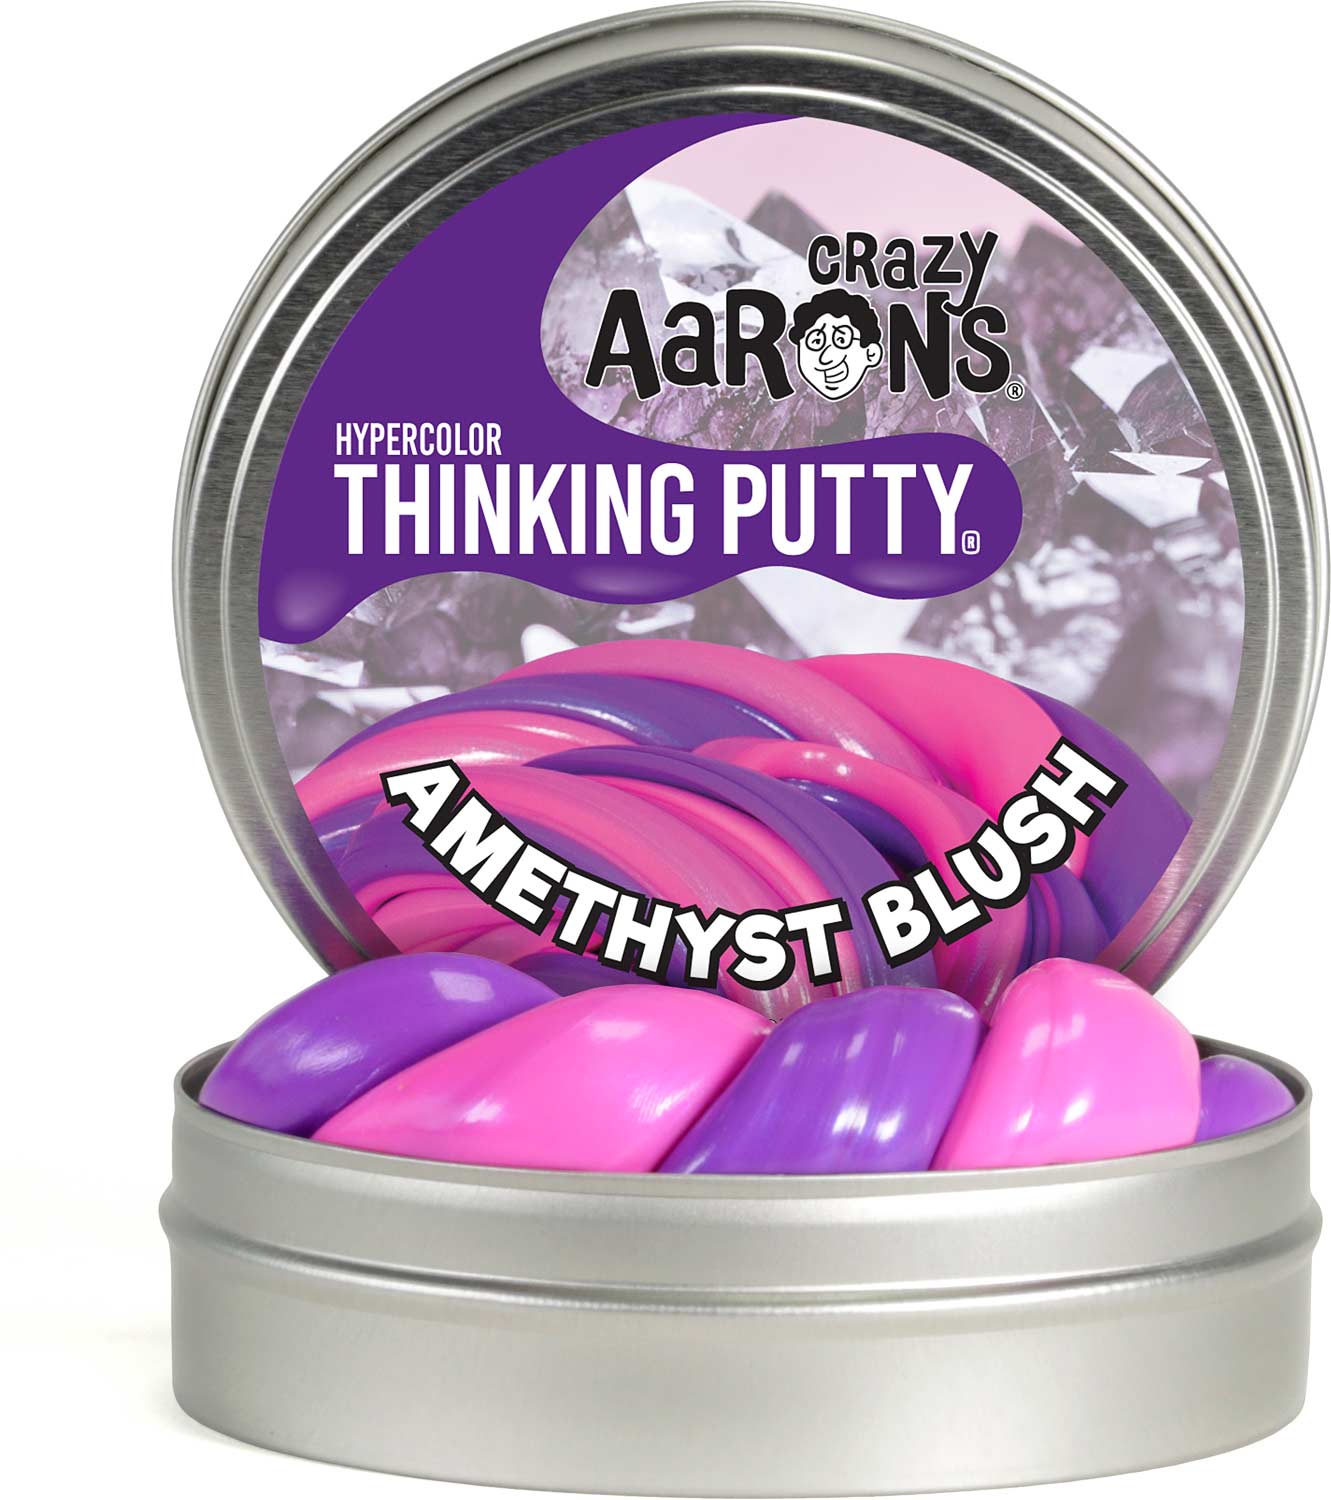 AMETHYST BLUSH HYPERCOLOR Crazy Aaron's Thinking Putty New small 2 inch tin .47 